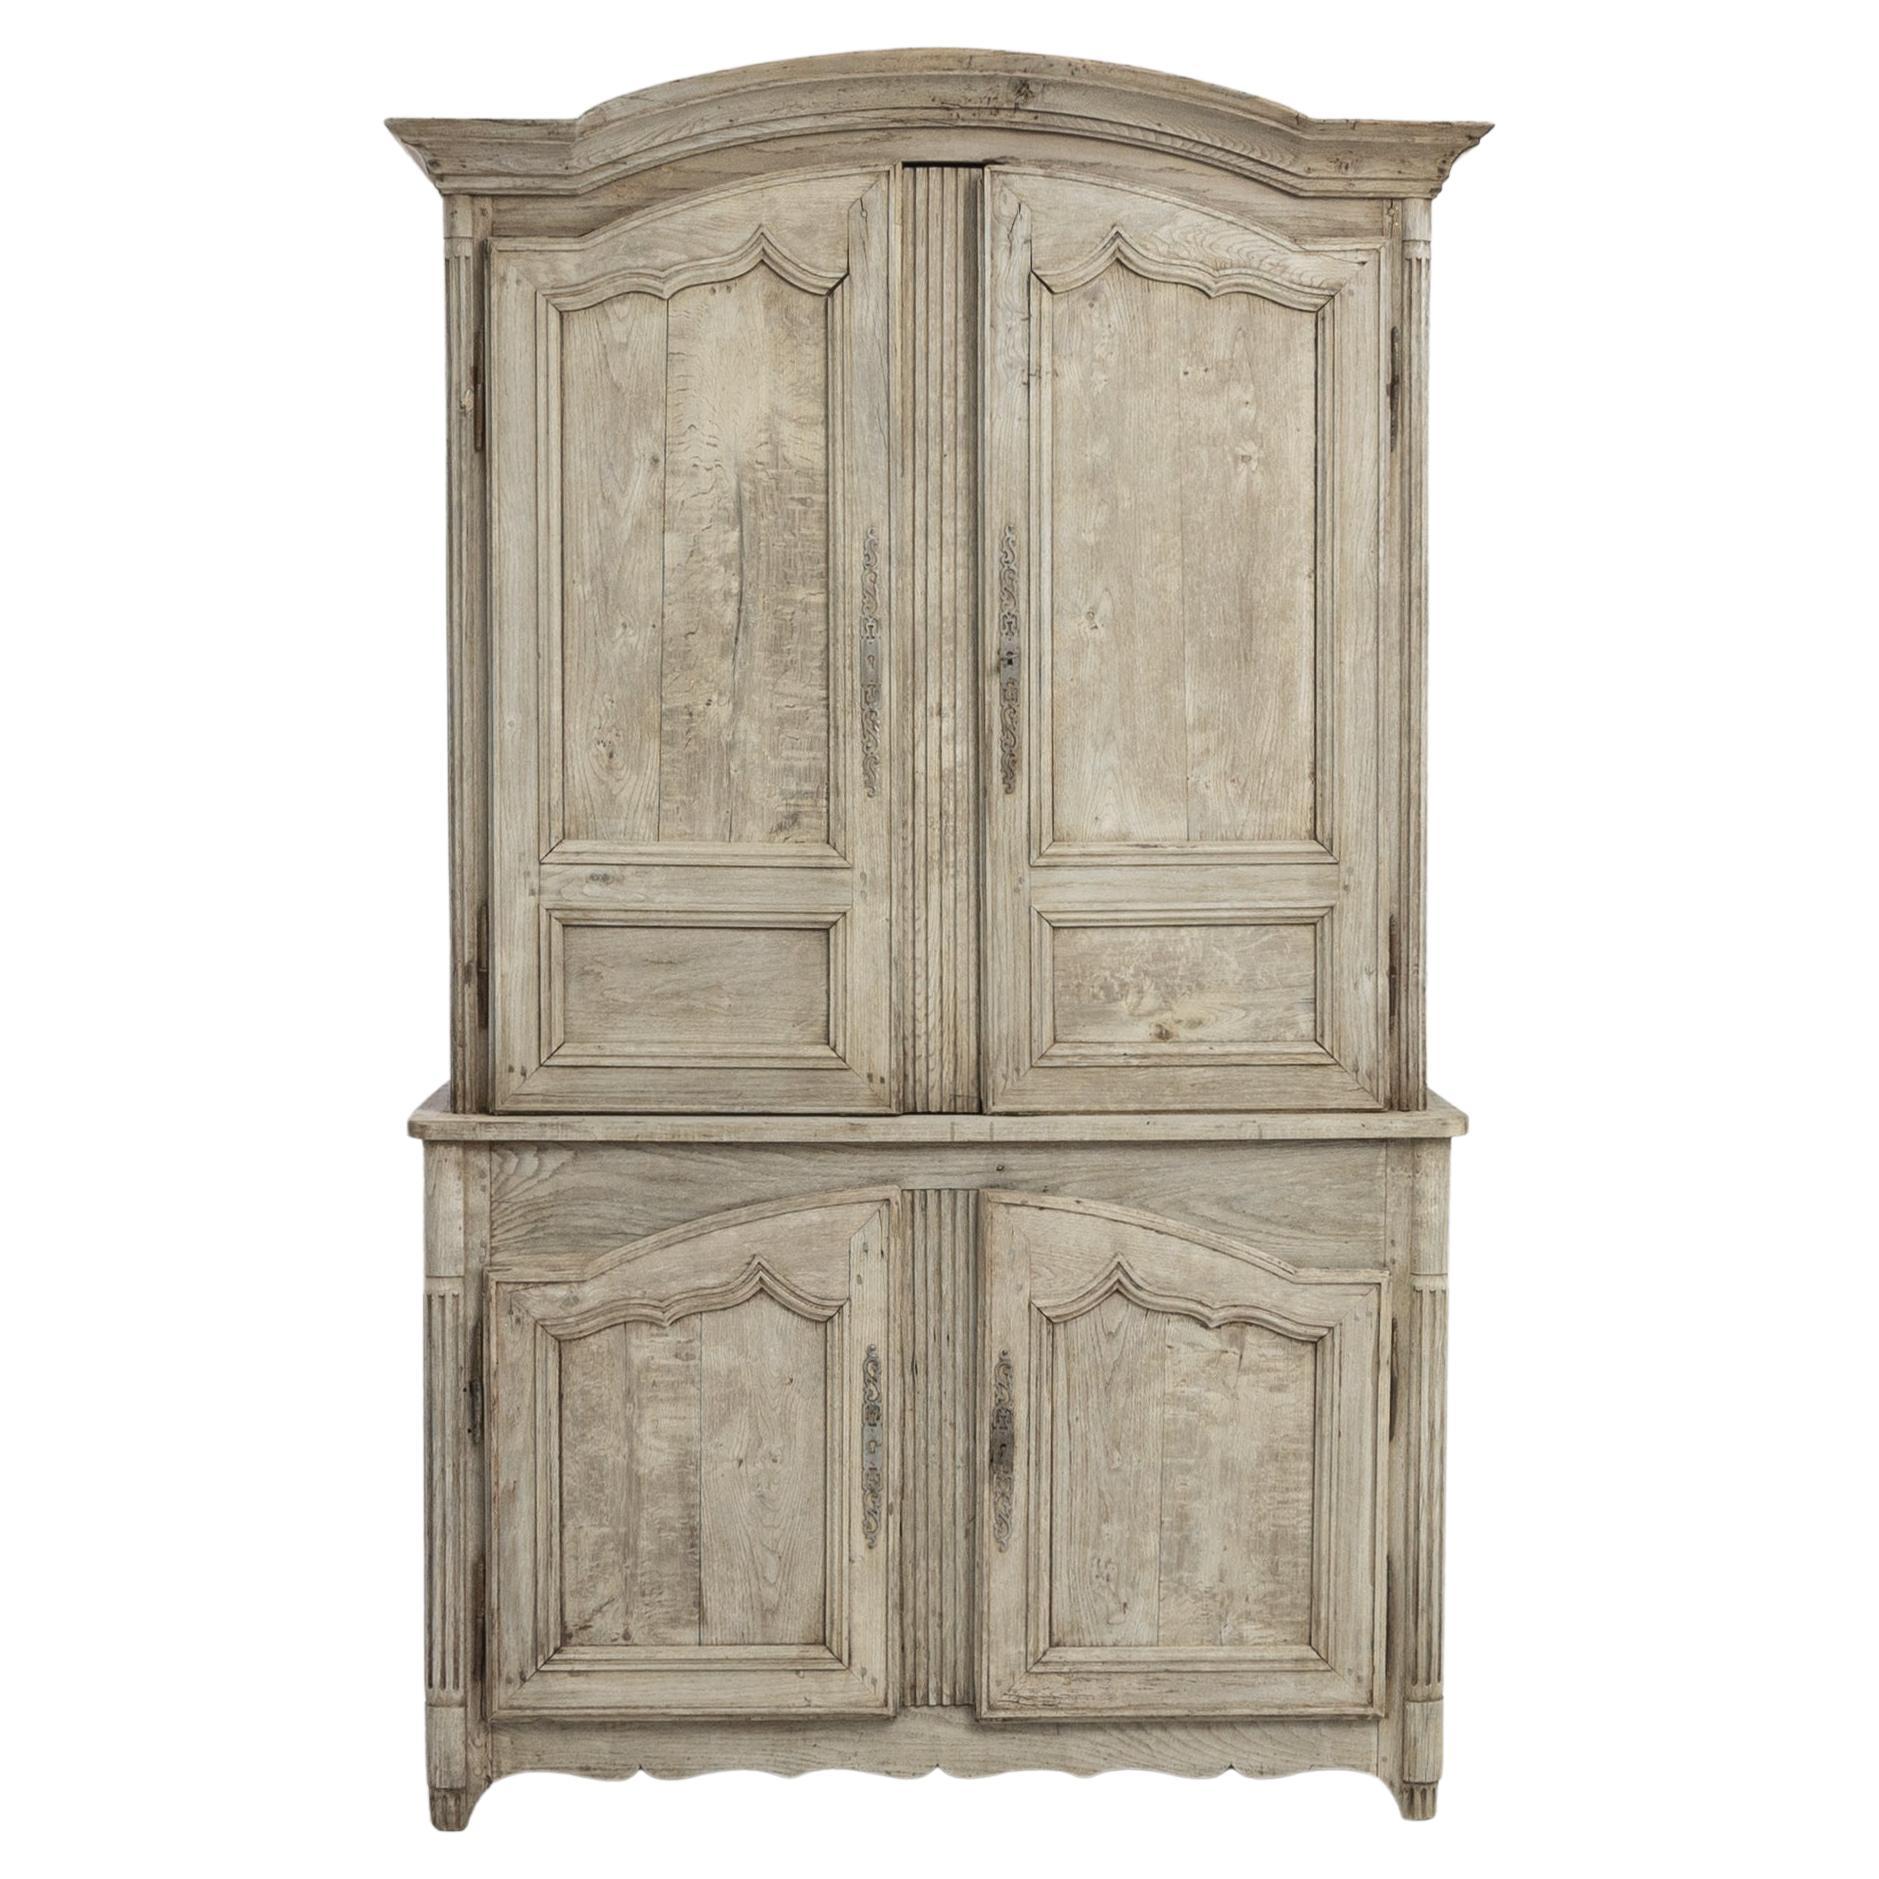 19th Century French Wooden Cabinet